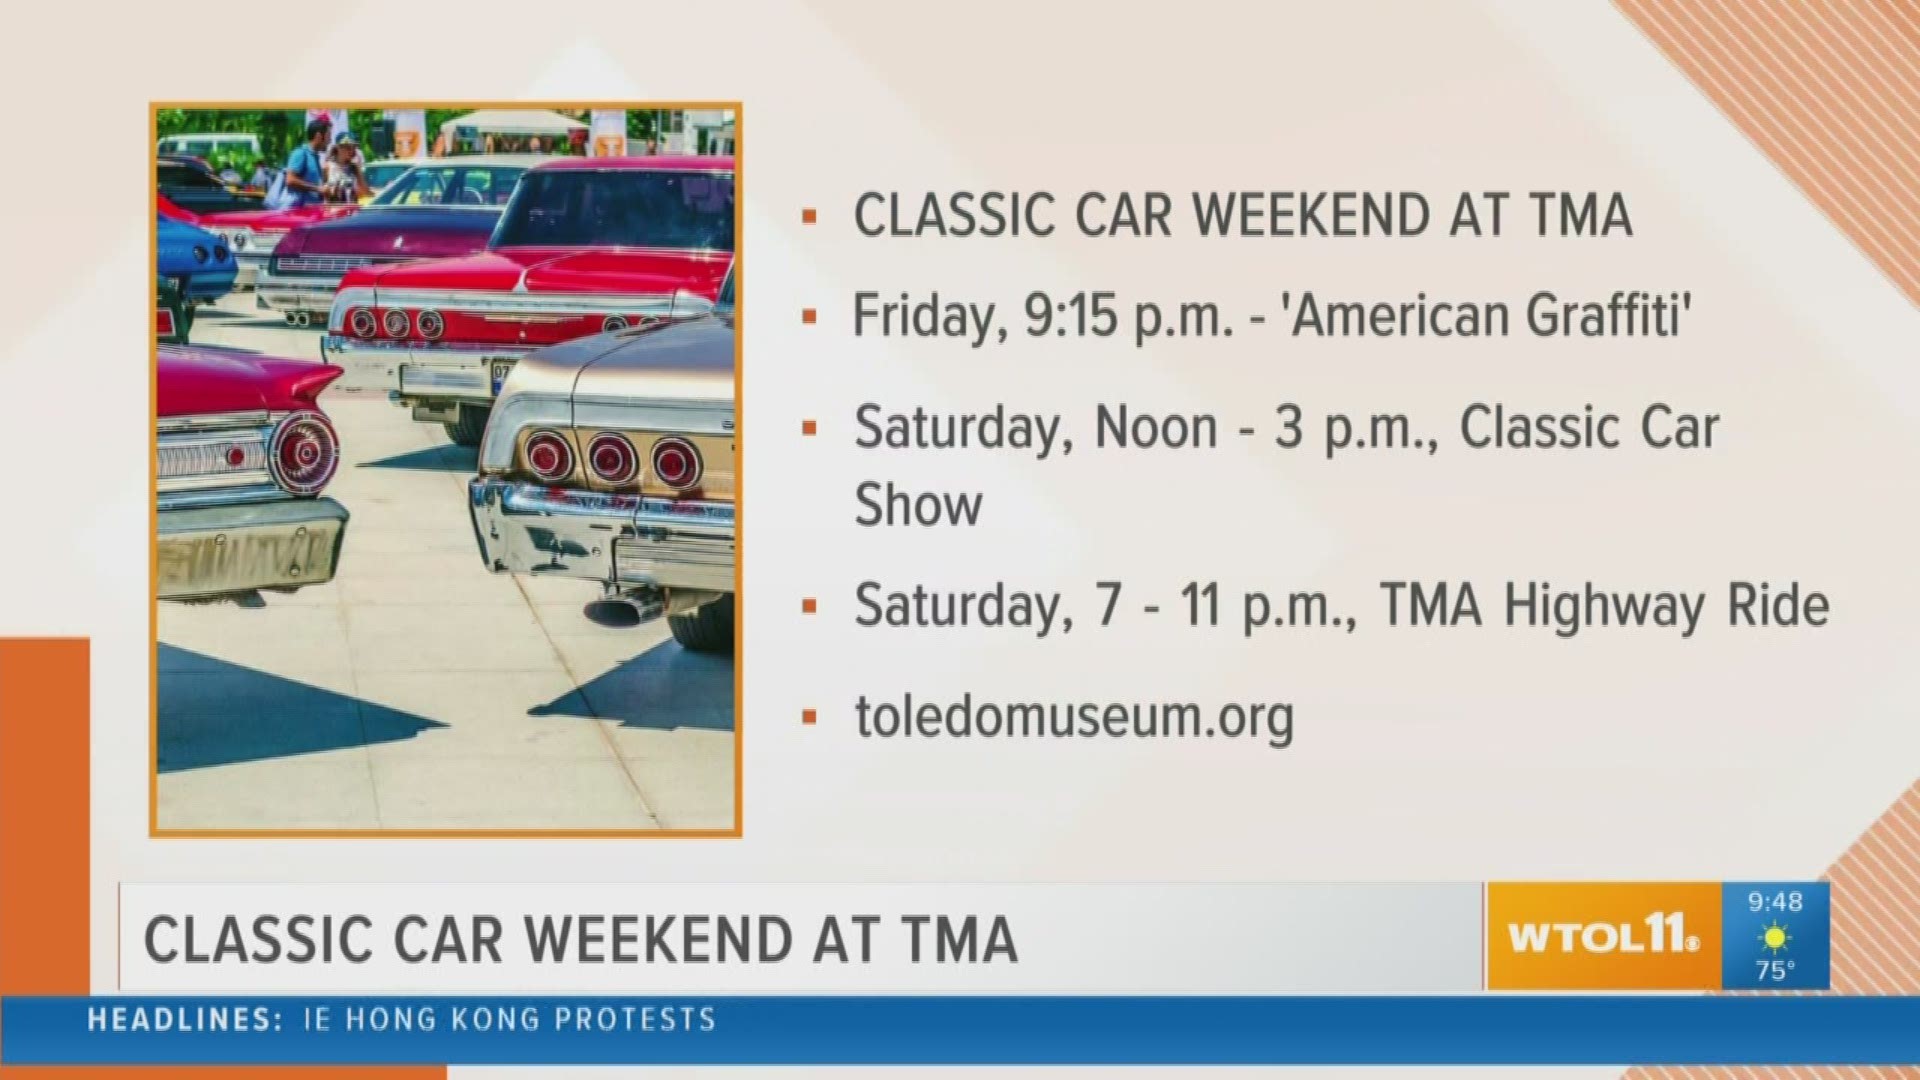 Check out some awesome cars at the Classic Car Weekend at the Toledo Museum of Art!